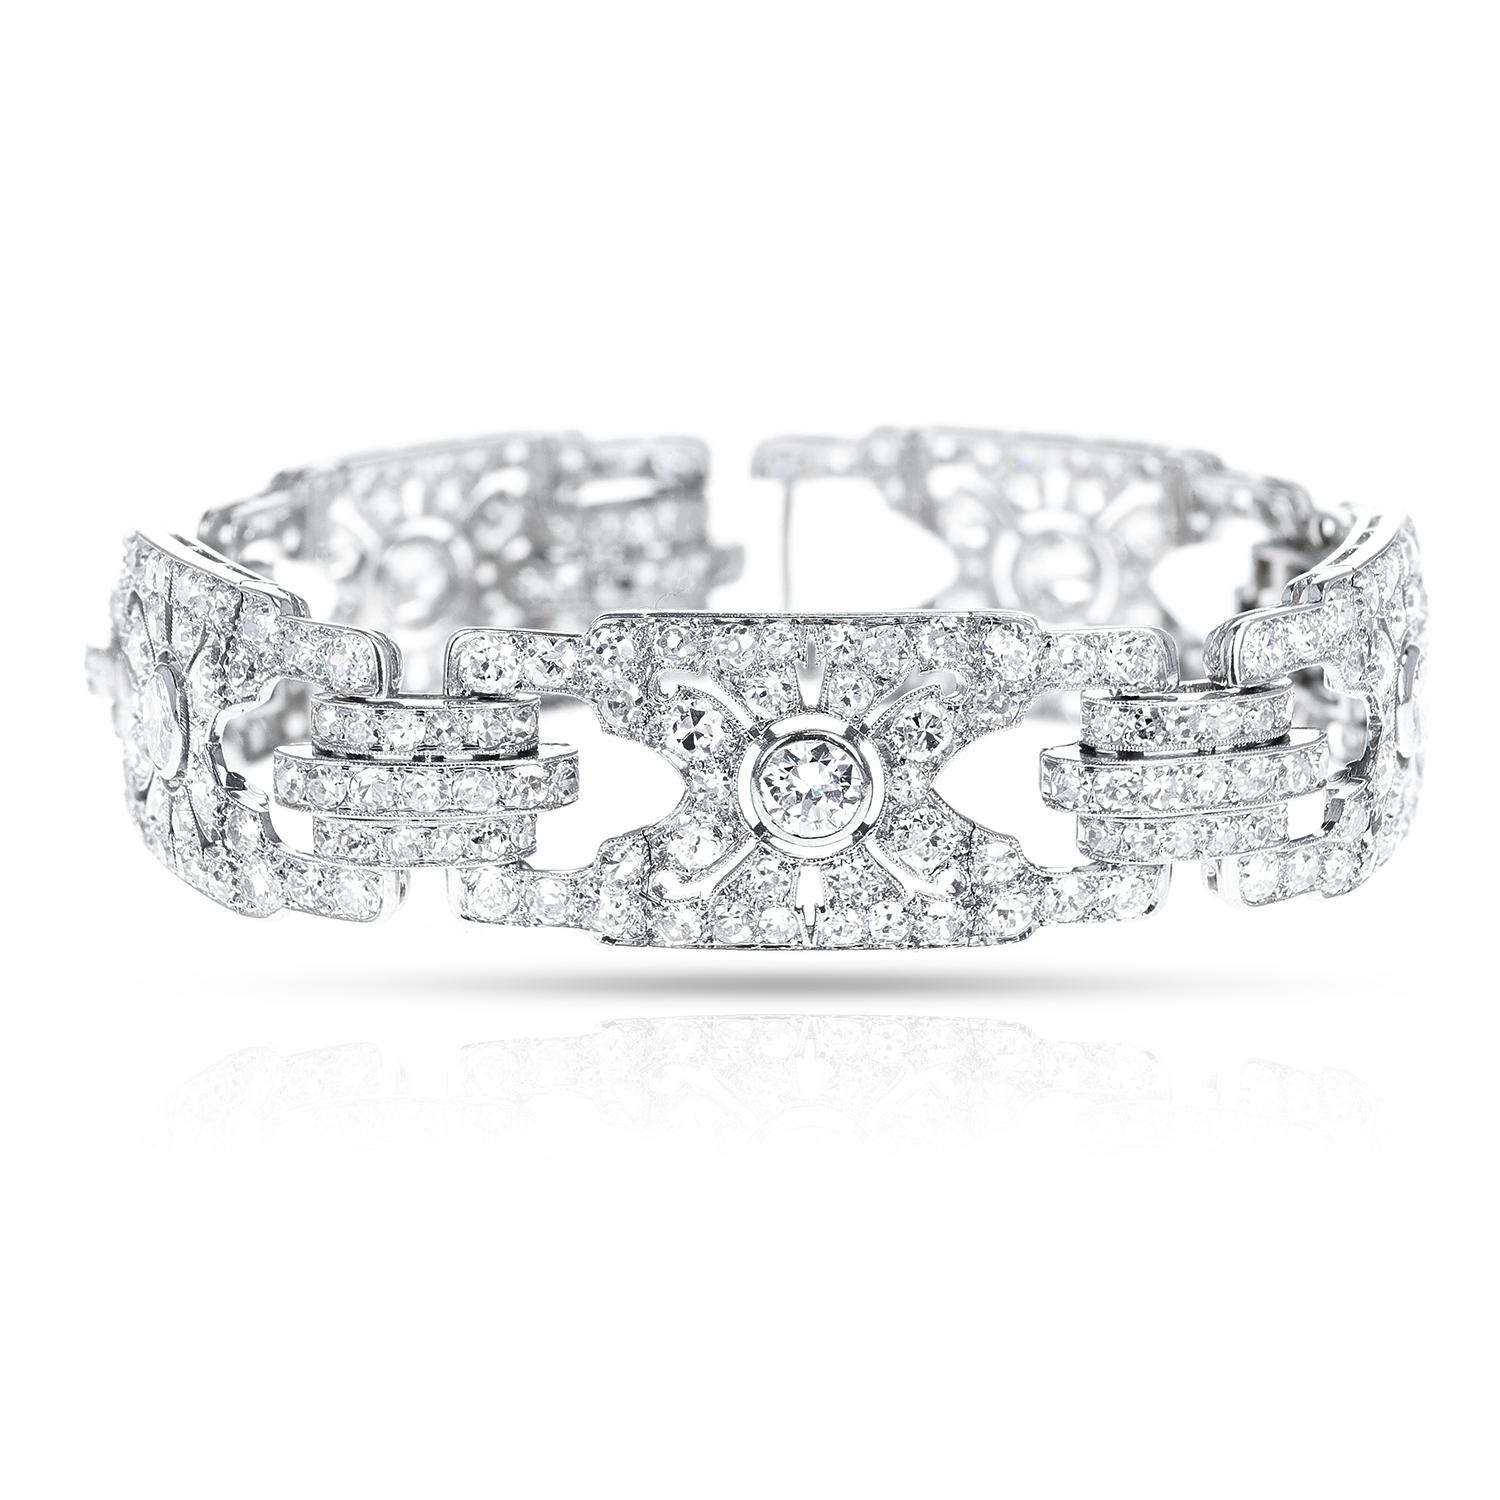 Cartier Paris Art Deco Diamond Bracelet, French Marks, Platinum In Excellent Condition For Sale In New York, NY